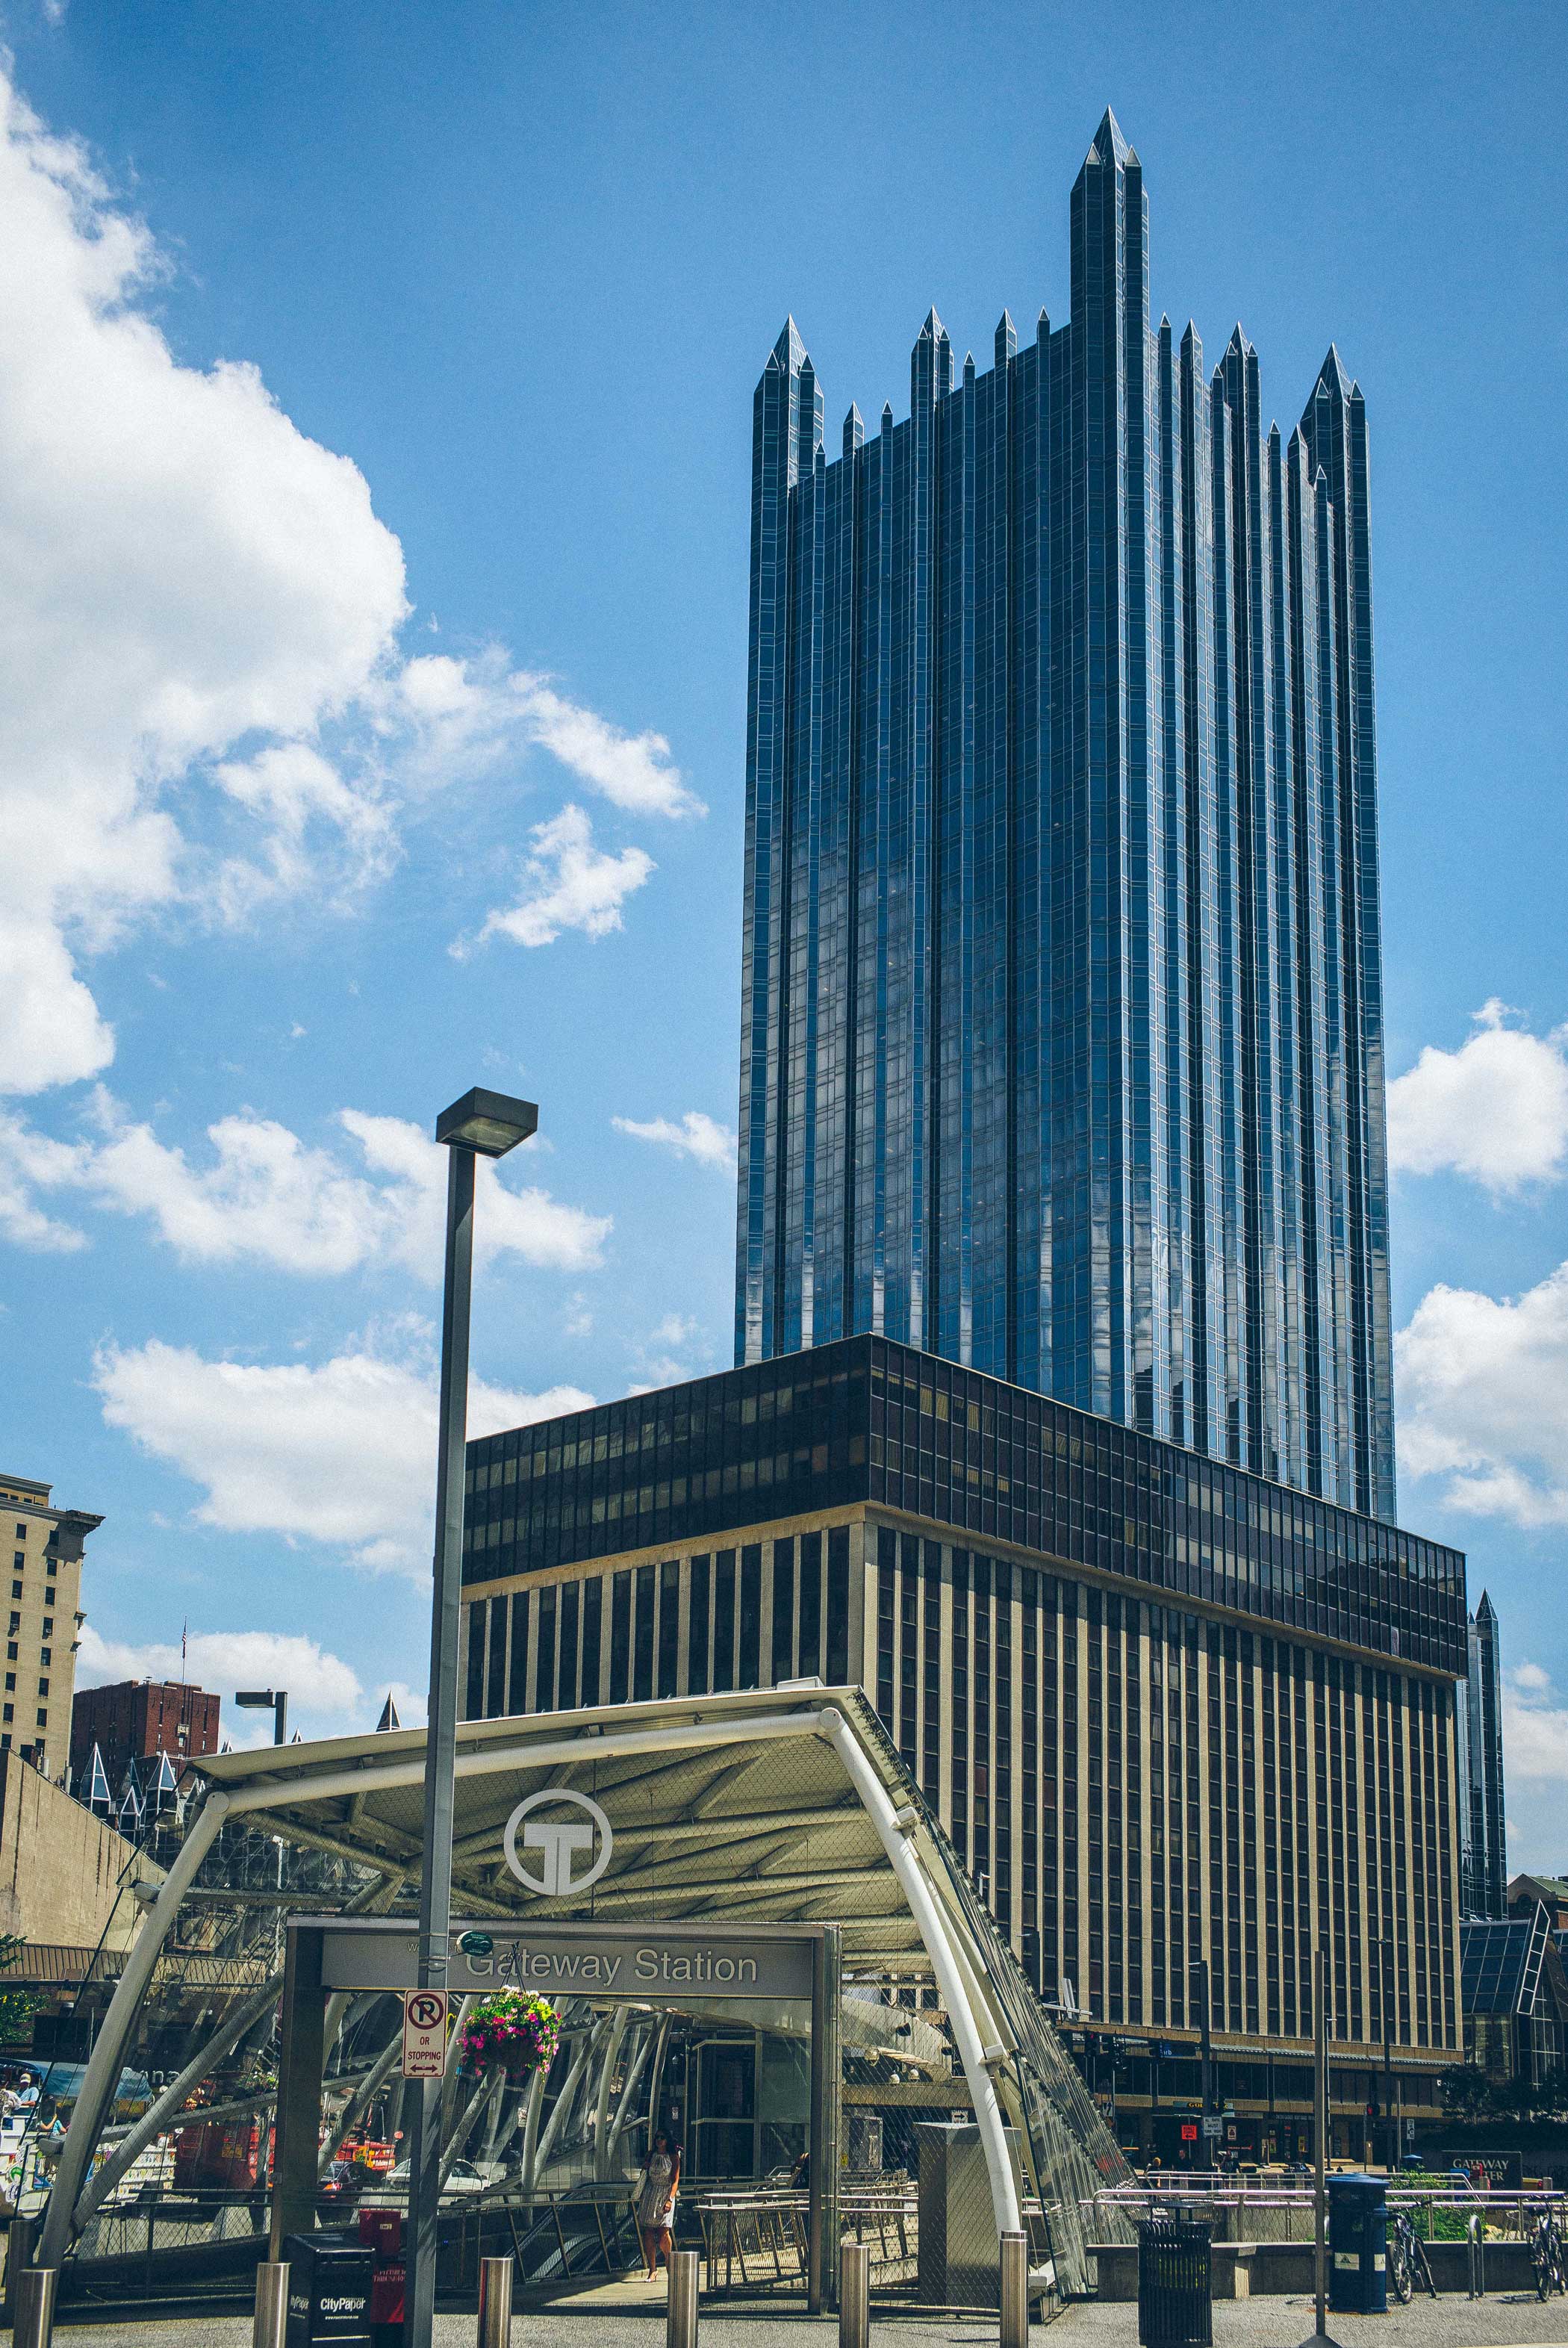 Downtown Pittsburgh on June 23, 2015.